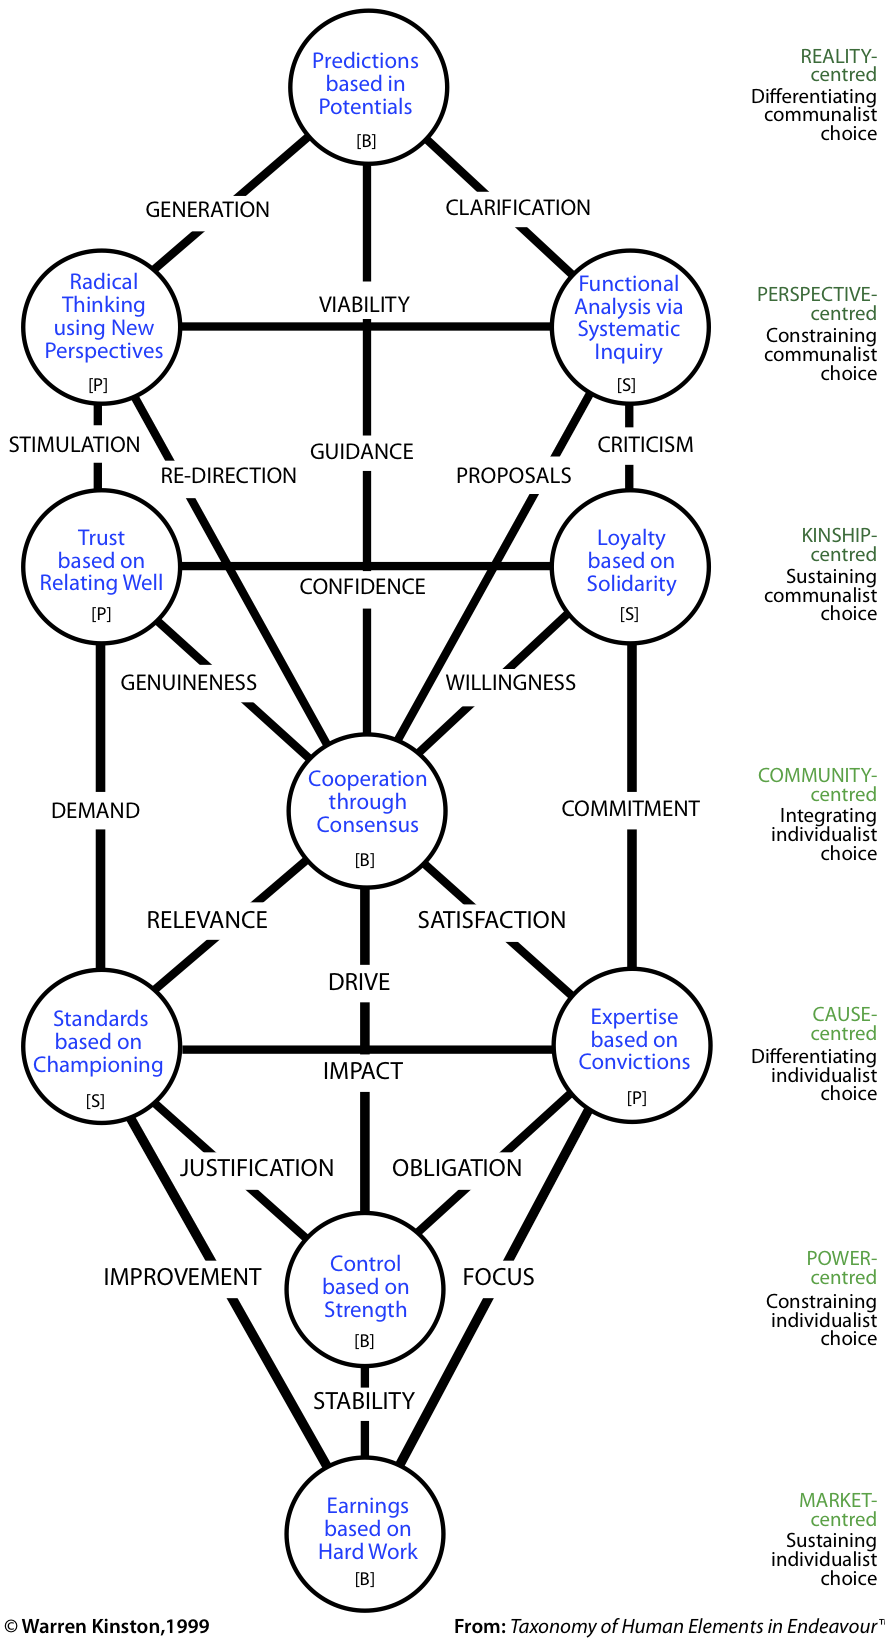 Tree of Cooperation, based on the framework of Interacting for Benefit.